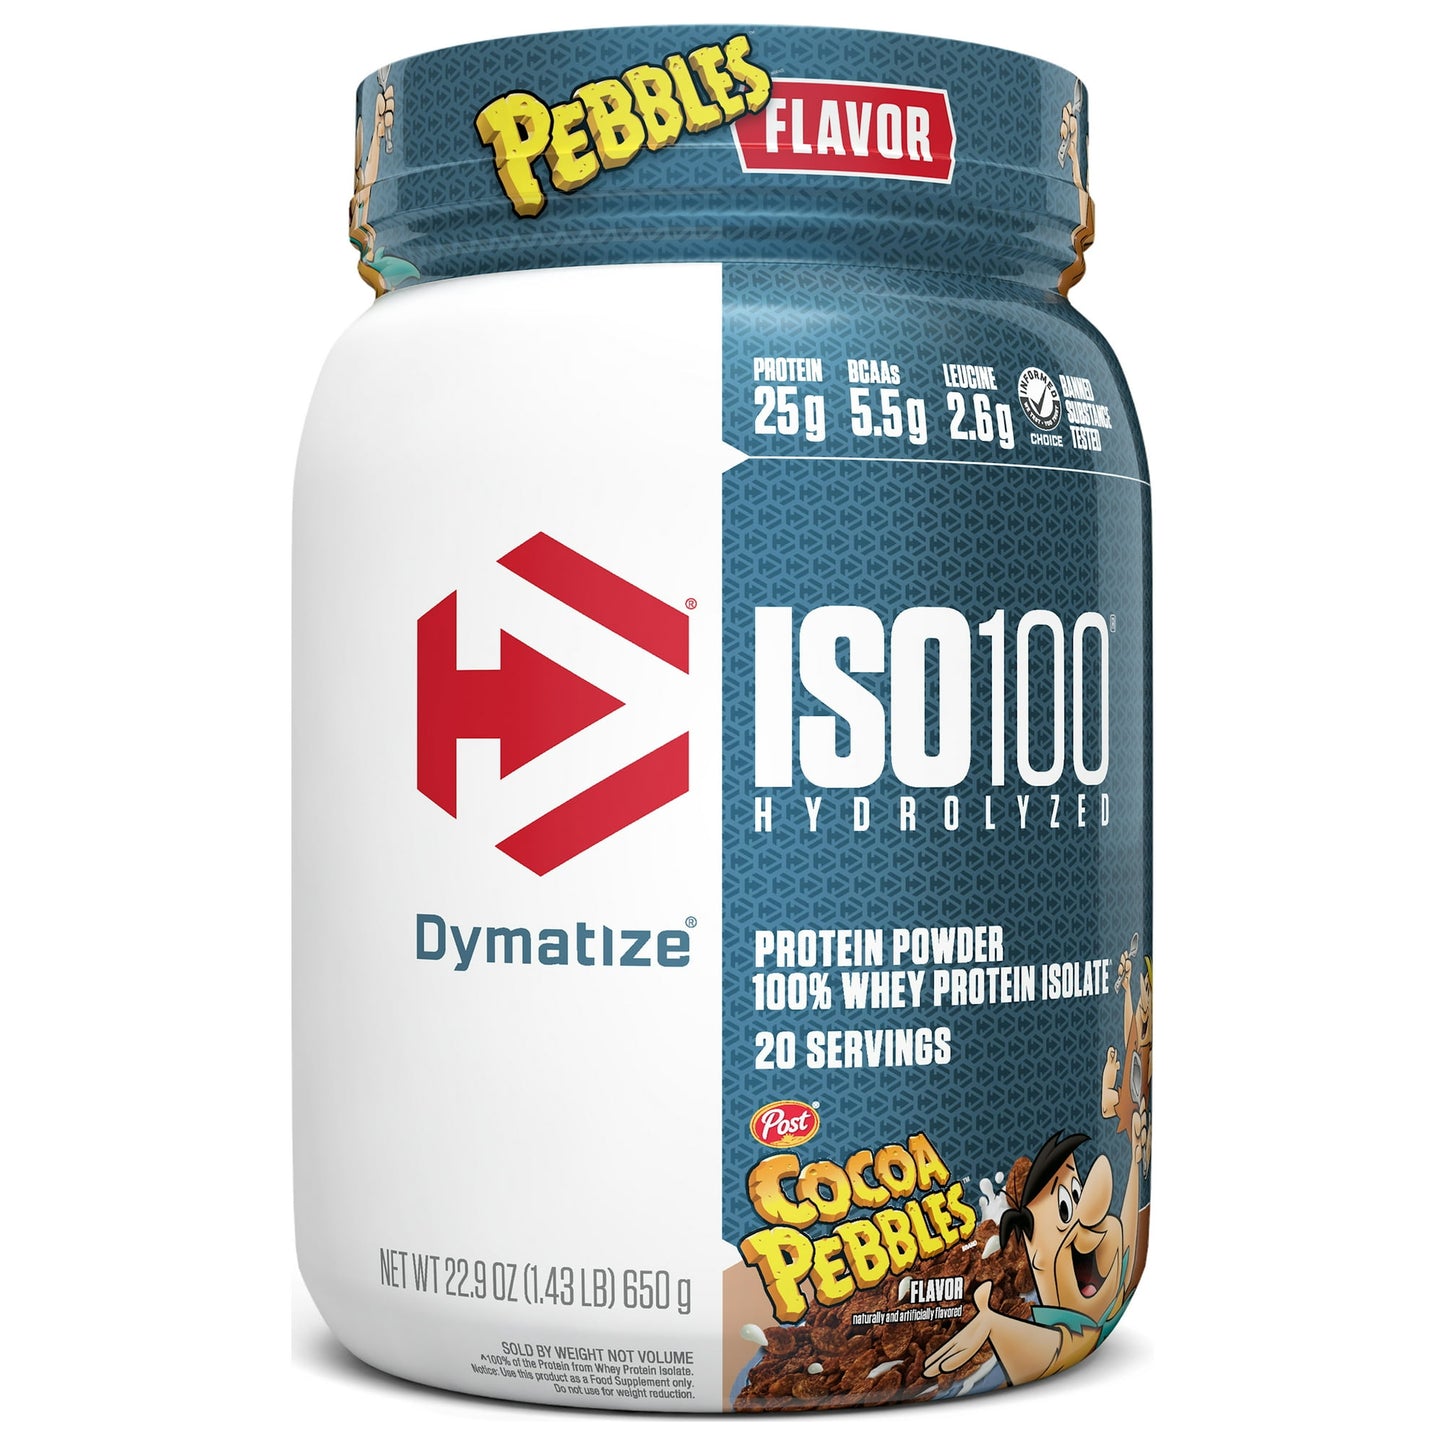 Dymatize ISO100 Hydrolyzed Whey Isolate Protein Powder, Cocoa Pebbles, 20 Servings